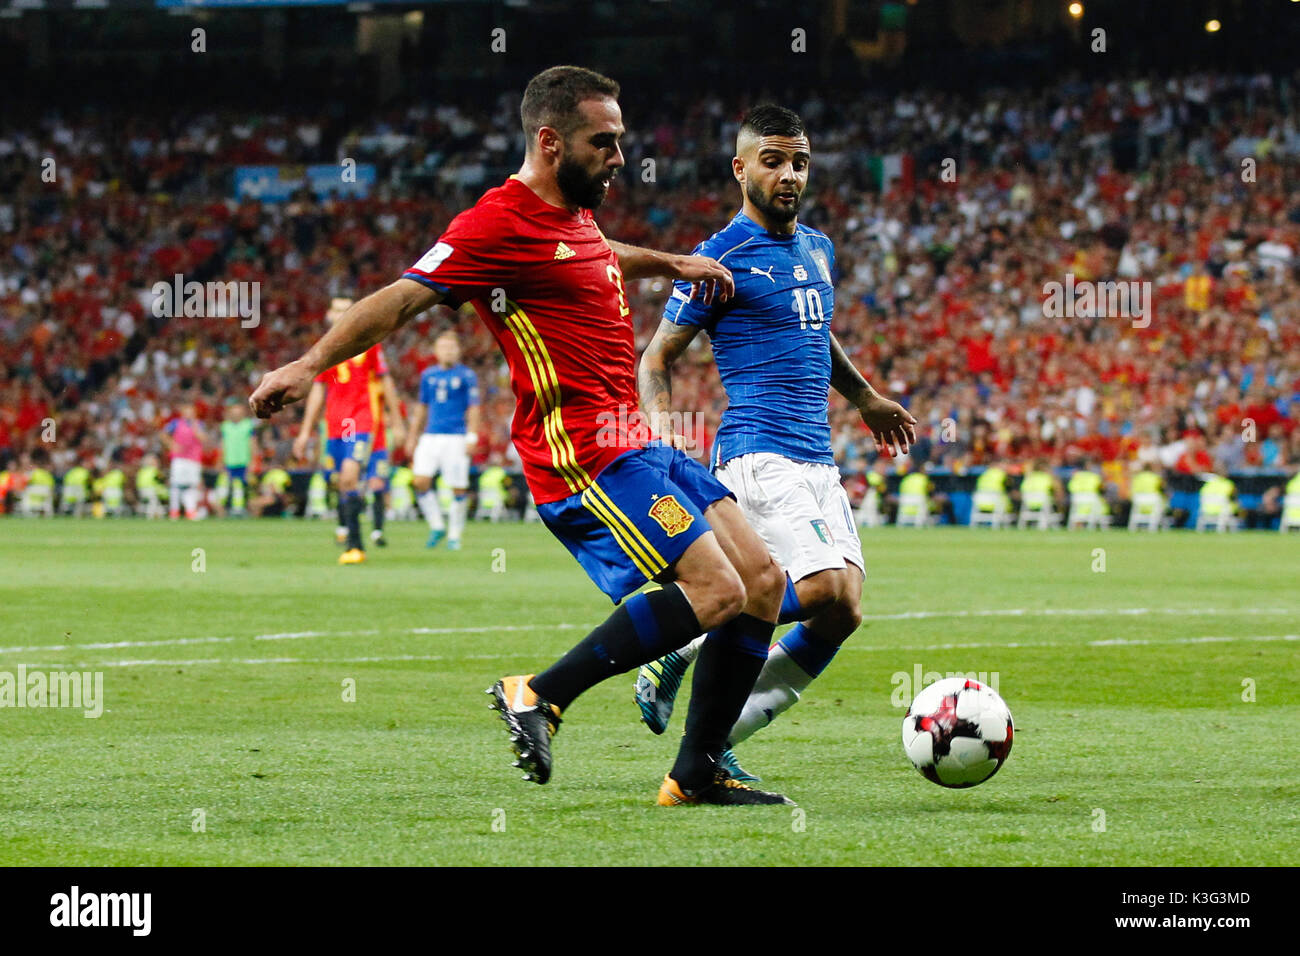 Dani Carvajal (2) Spanish player. Lorenzo Insigne (10) Italian player.  In action during the qualifying match for the 2018 World Cup, Round 7, between Spain vs Italy at the Santiago Bernabeu stadium in Madrid, Spain, September 2, 2017 . Stock Photo